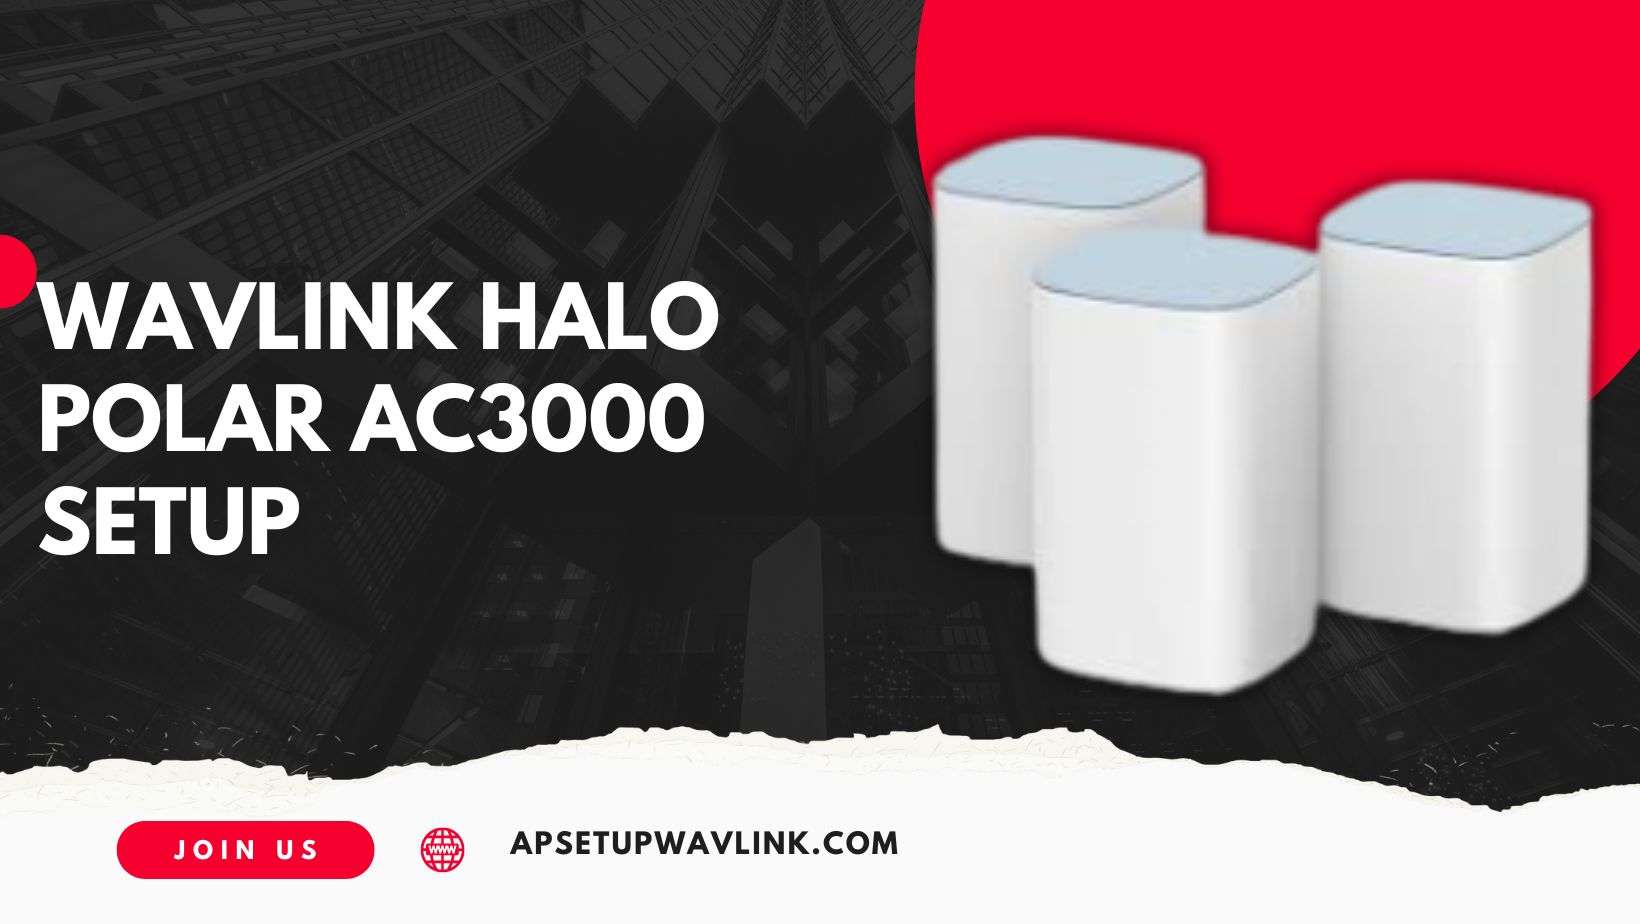 You are currently viewing Wavlink Halo Polar AC3000 Setup